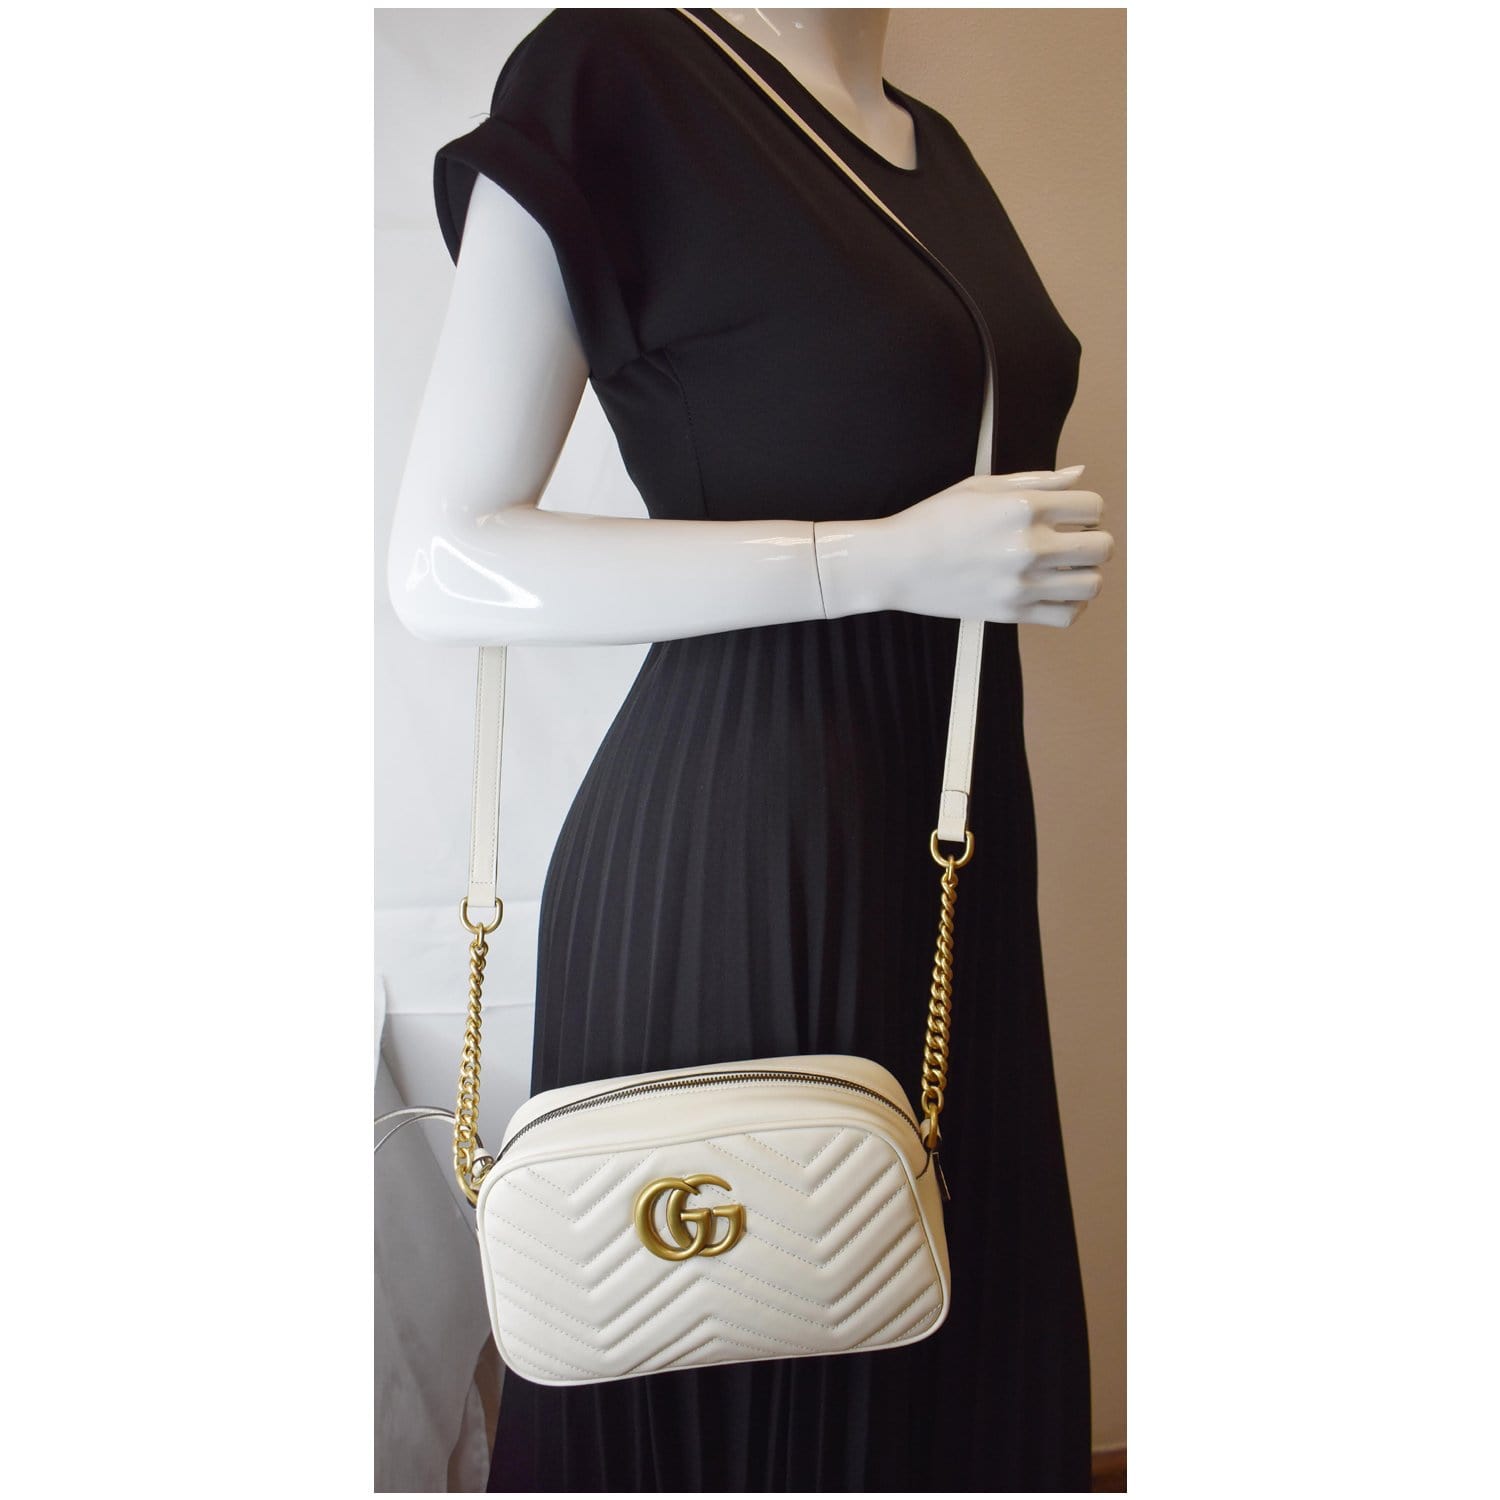 Gg marmont flap leather crossbody bag Gucci White in Leather - 31860622